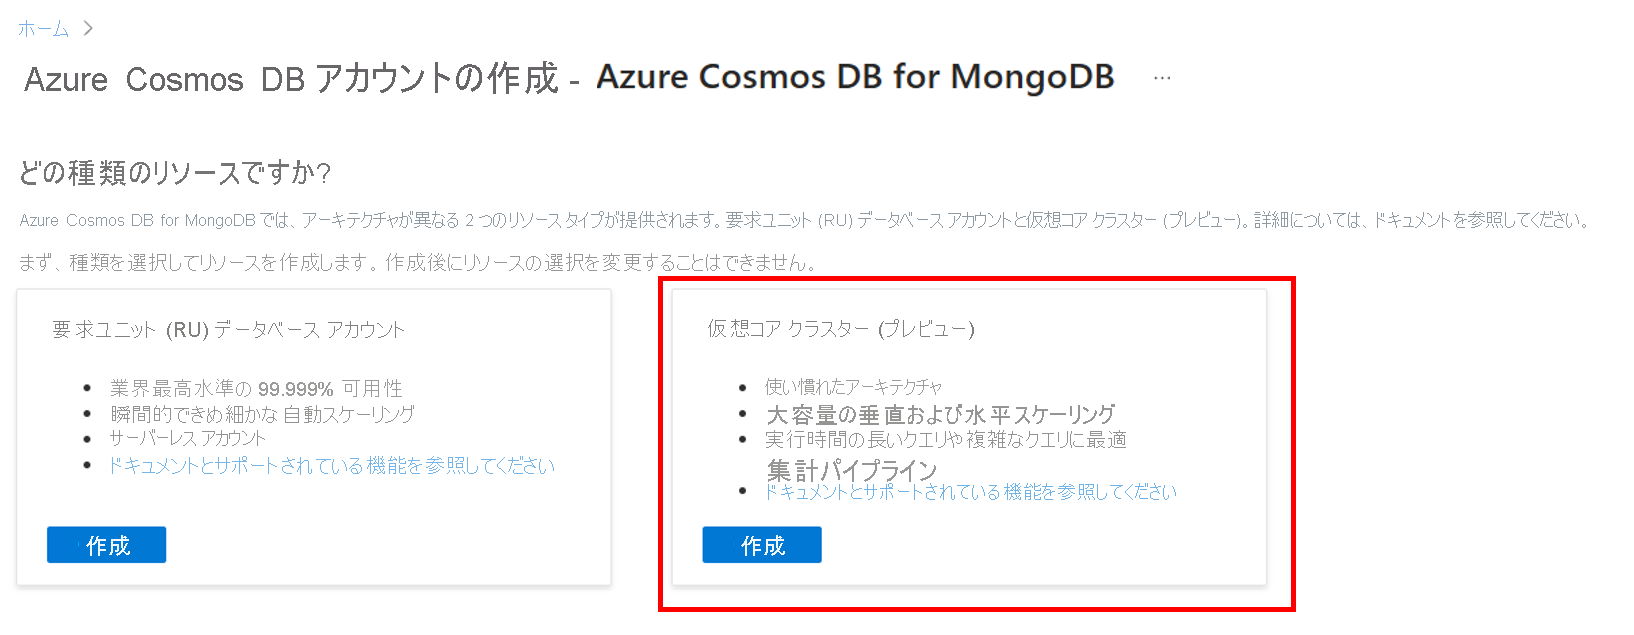 Screenshot of the select resource type option page for Azure Cosmos DB for MongoDB.